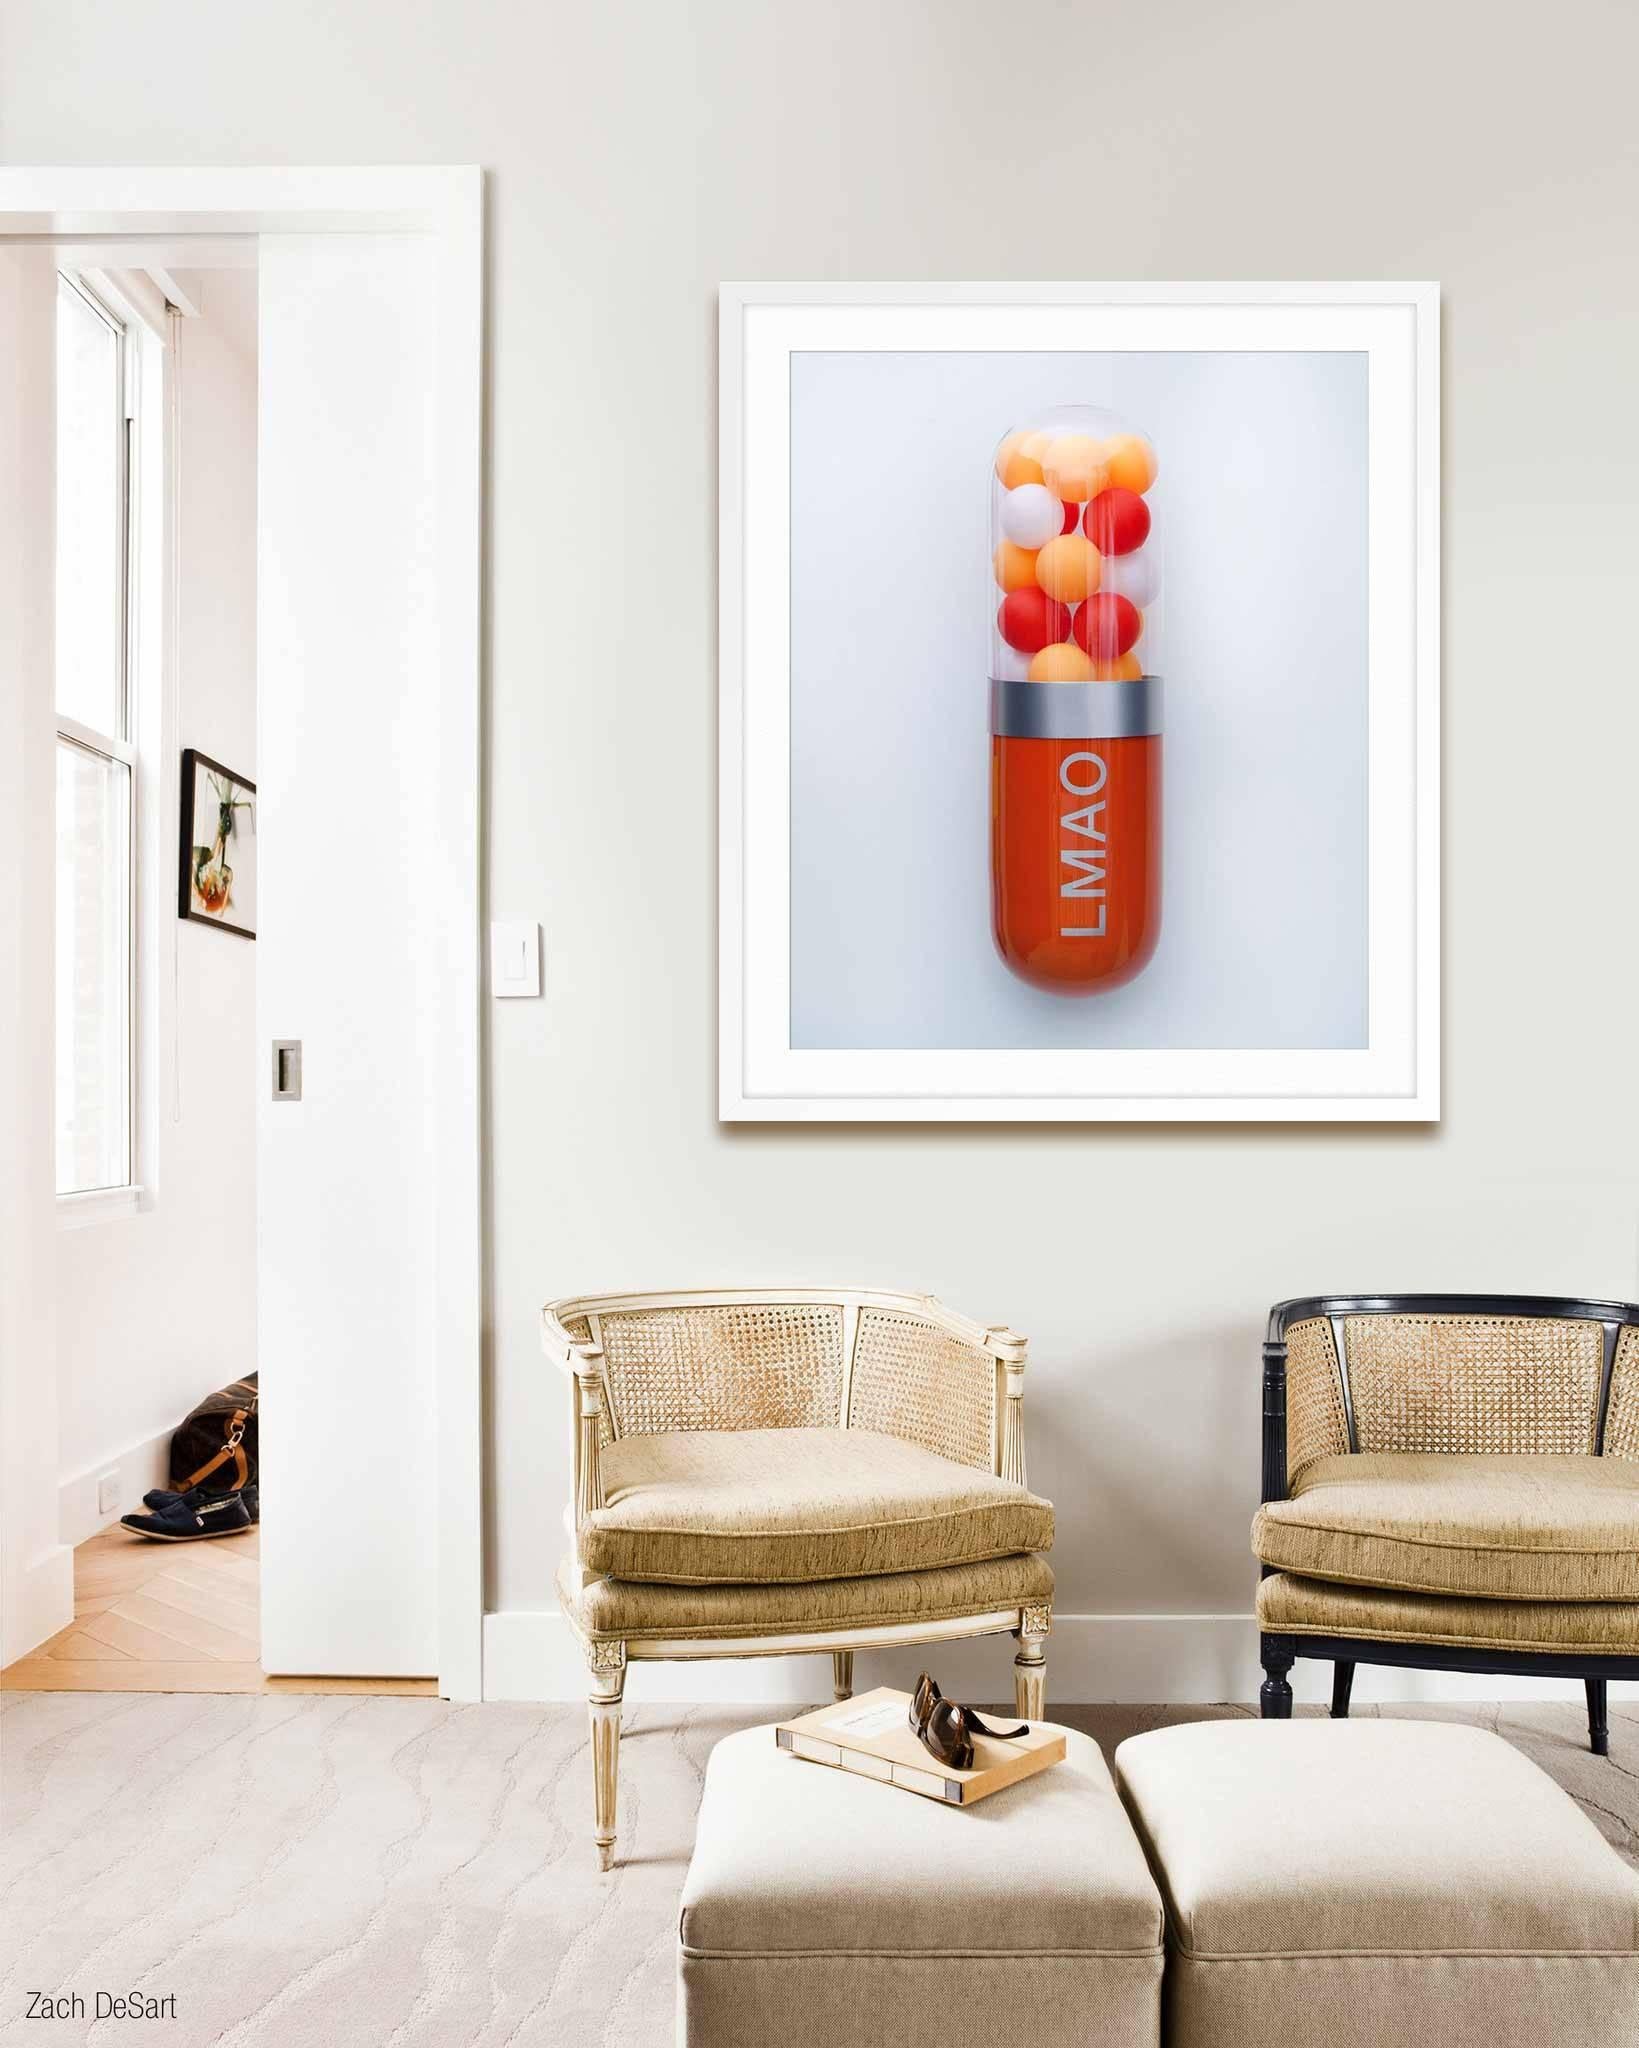 ABOUT THIS PIECE: Our Gallery collaborated with artist Edie Nadelhaft to create limited edition photos of her Better Living Thru Chemistry series. Better Living Thru Chemistry is a limited edition sculptures series consisting of candy-colored glass